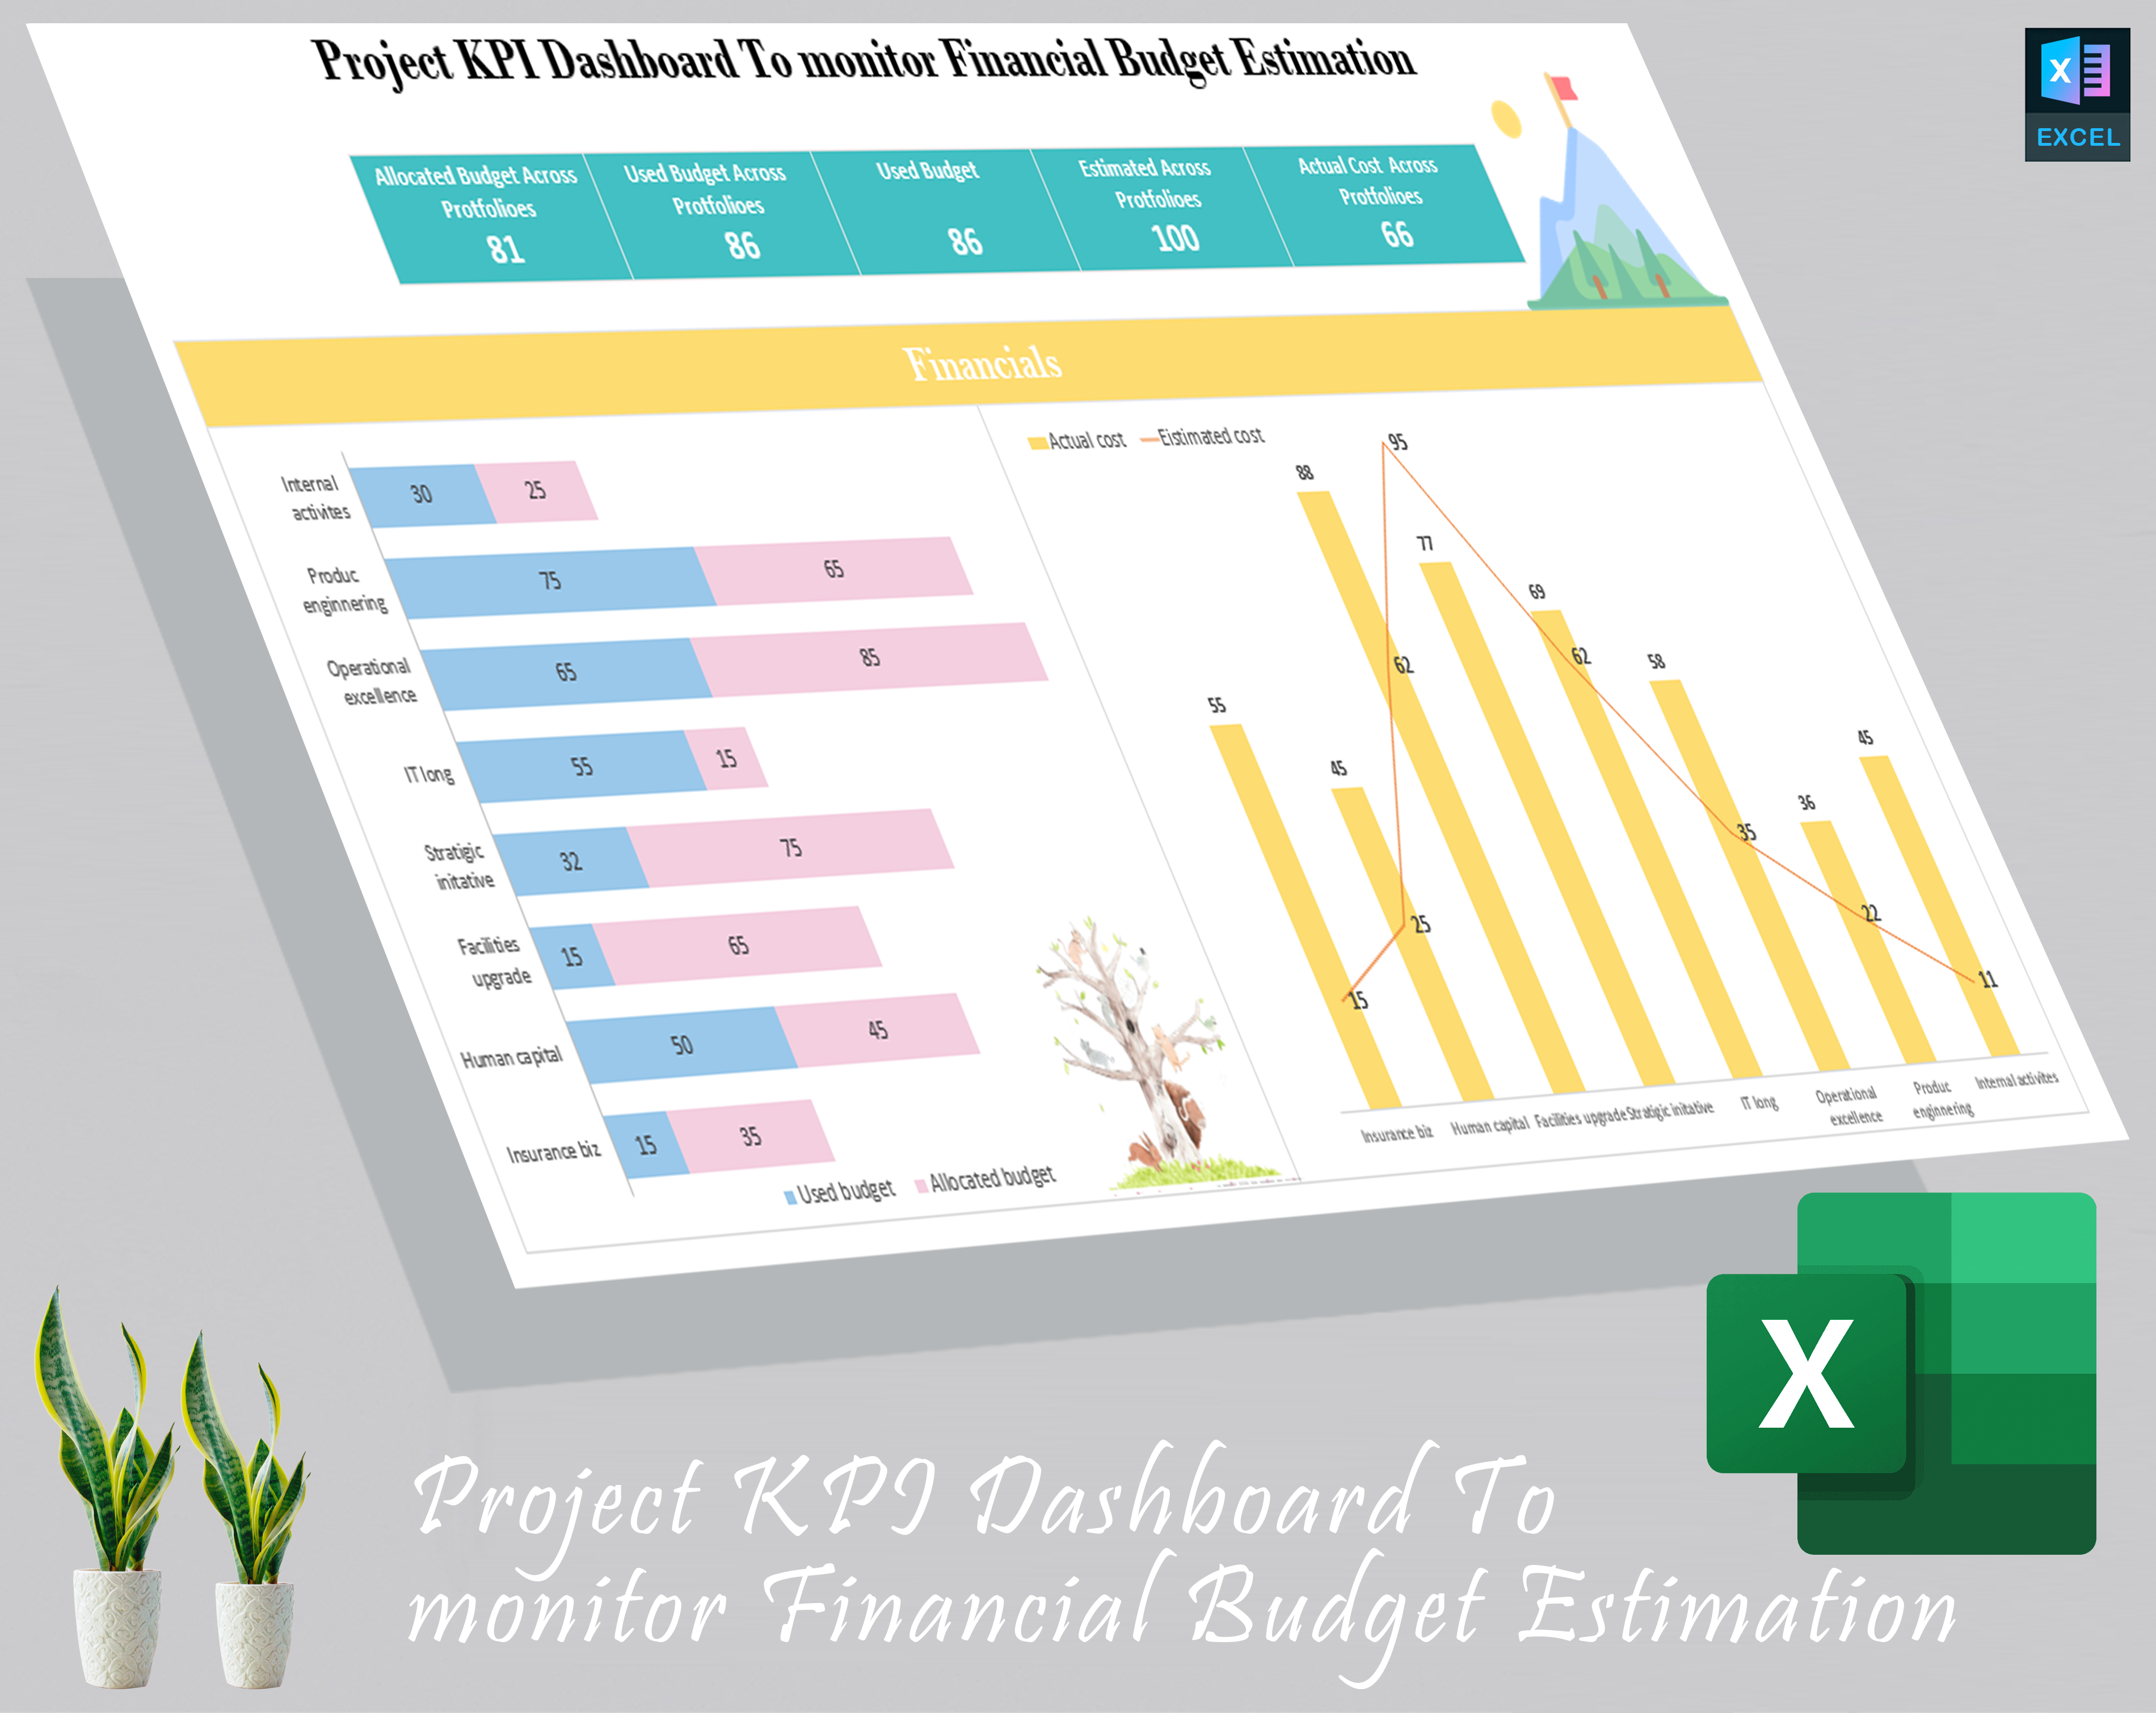 Project KPI Dashboard To monitor Financial Budget Estimation